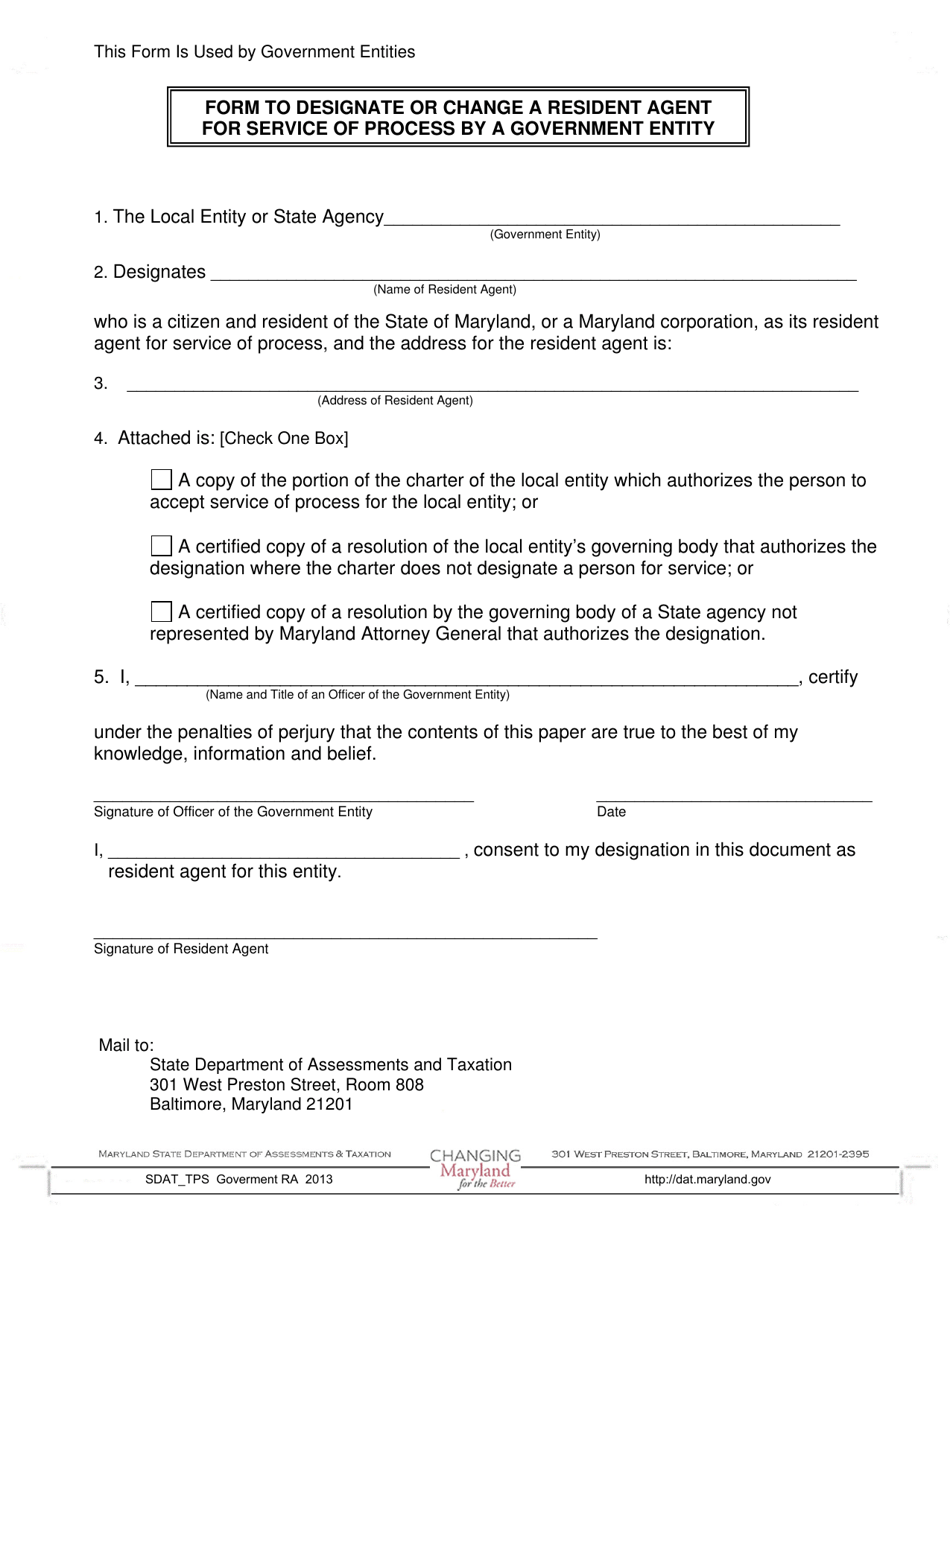 Form to Designate or Change a Resident Agent for Service of Process by a Government Entity - Maryland, Page 1